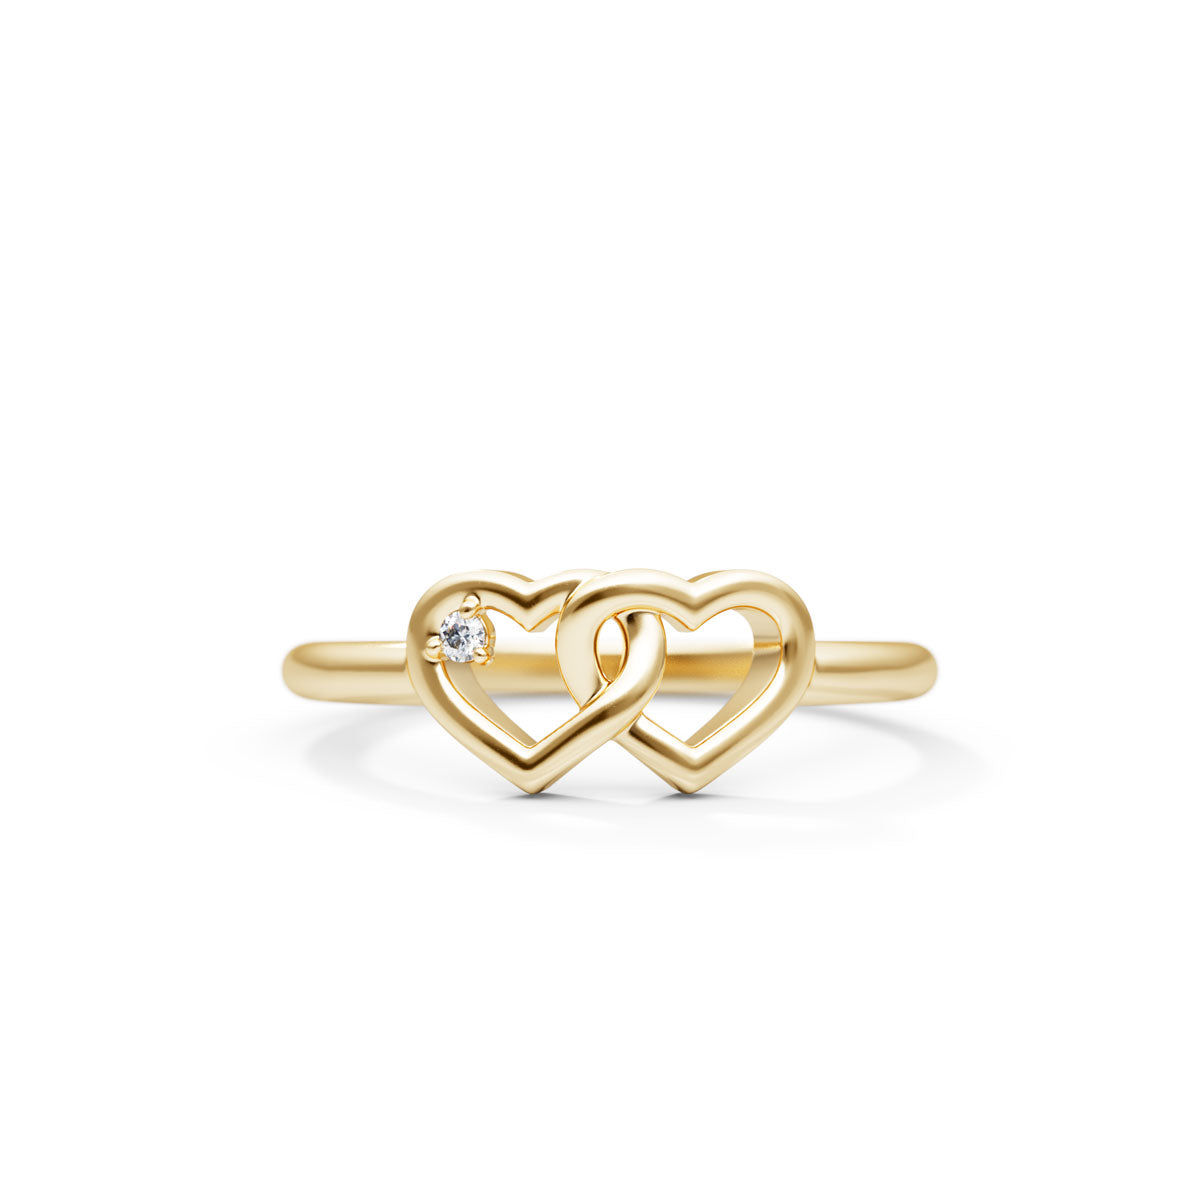 Two-Intertwined-Hearts-Diamond-Ring-14K-Yellow-Gold-Front  1200 × 1200px